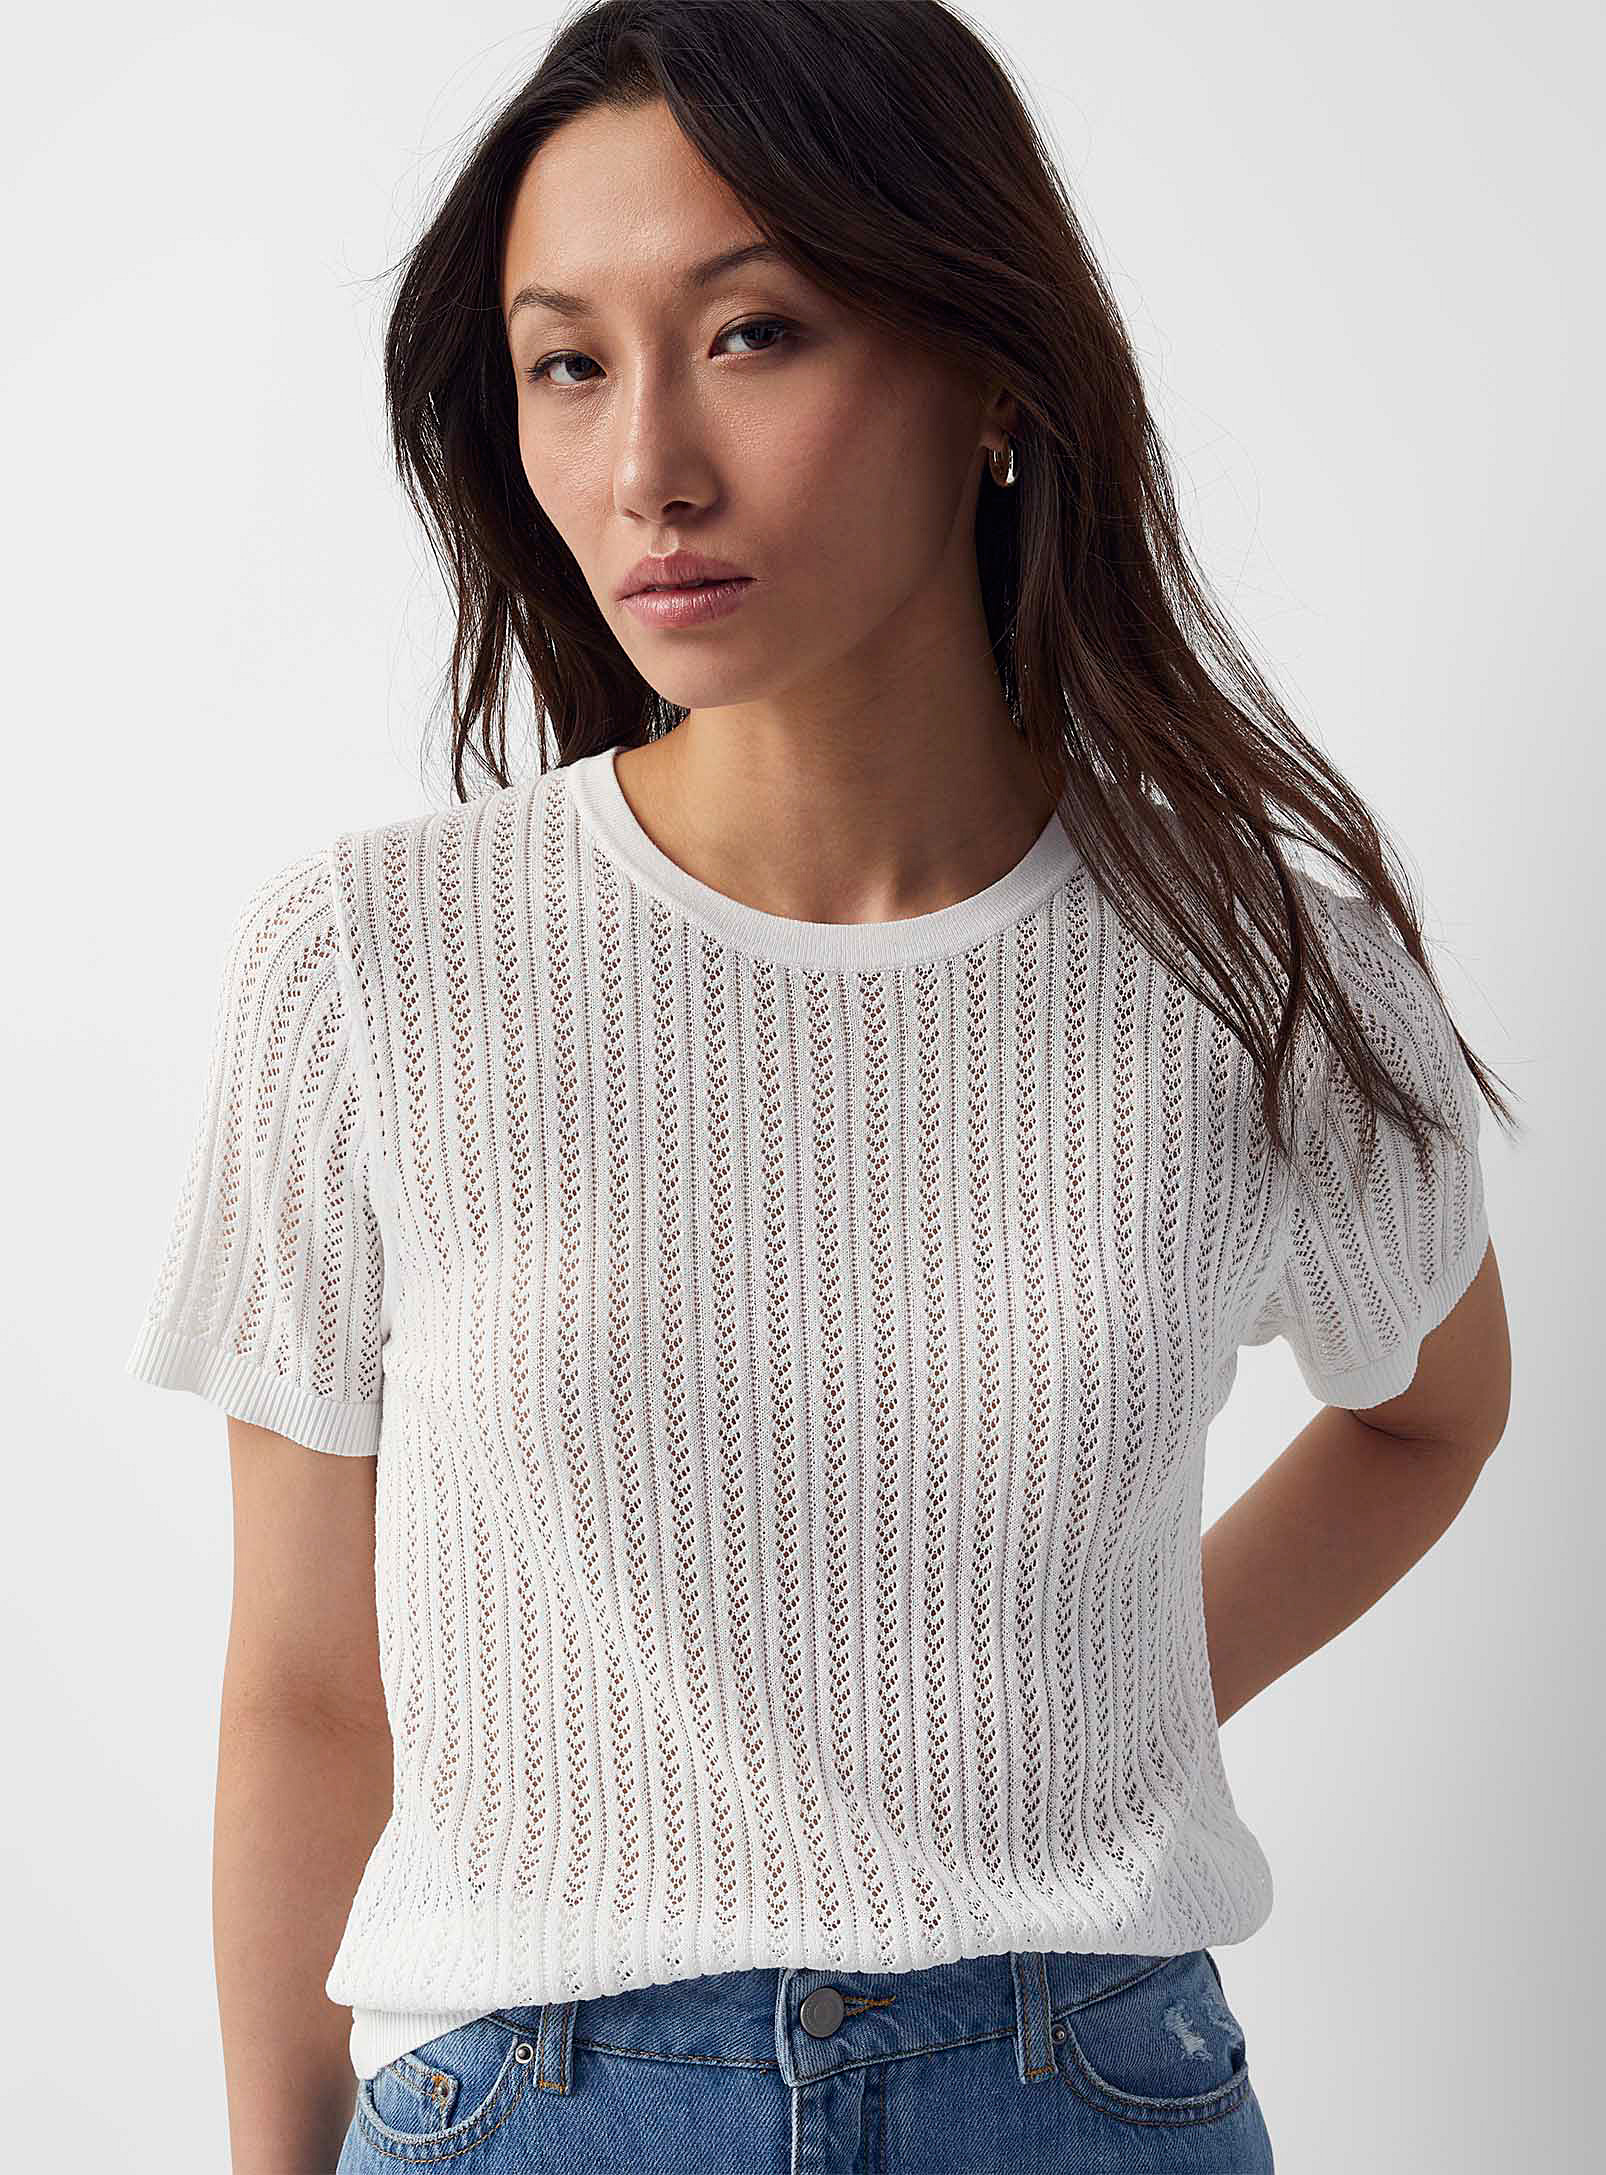 Contemporaine Pointelle Print Light Sweater In Ivory White